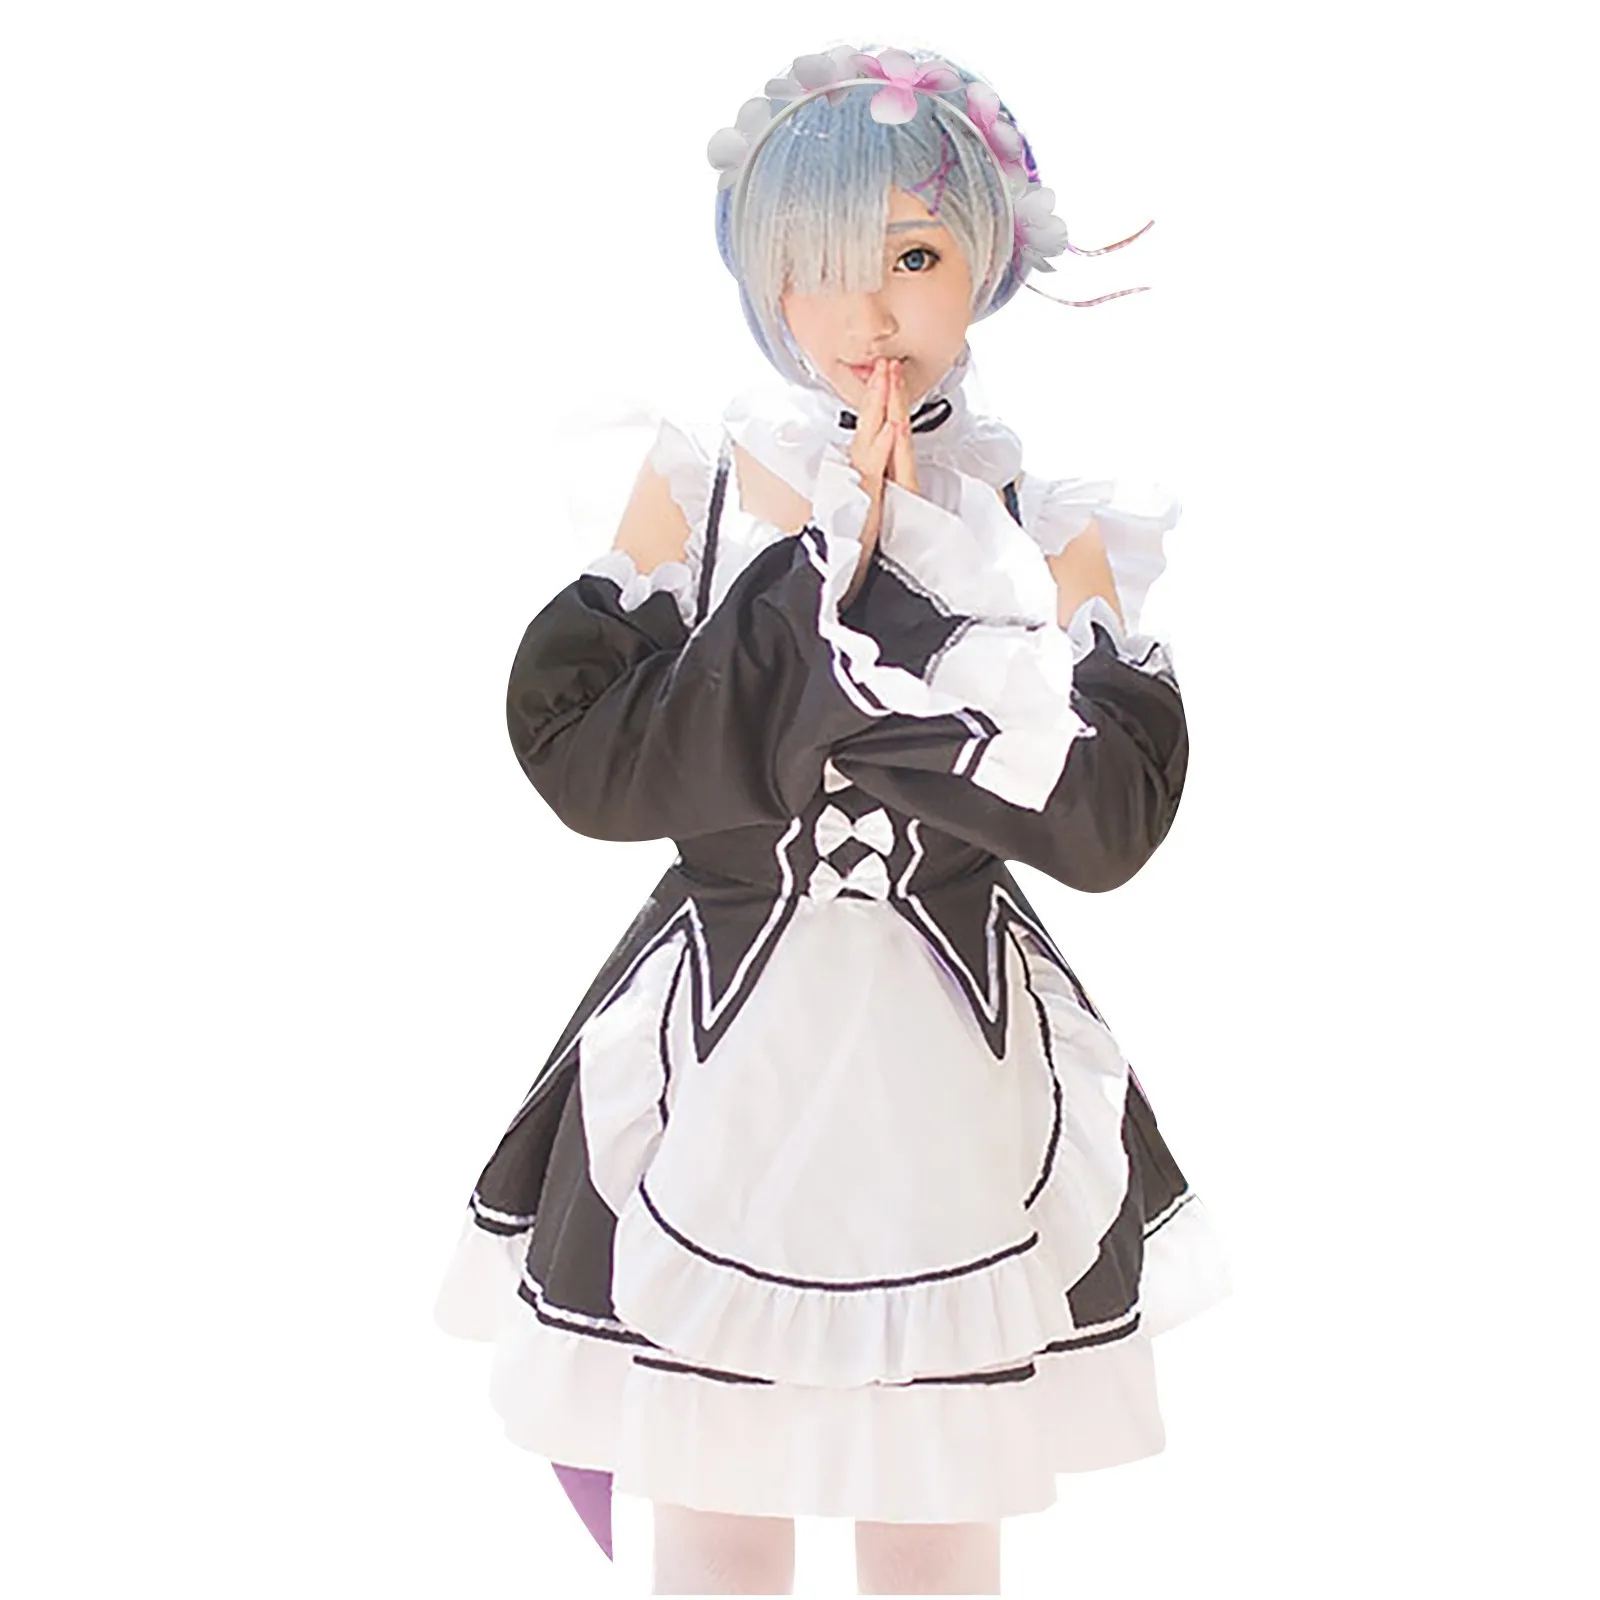 

Women Lovely Maid Cosplay Costume Animation Show Japanese Outfit Dress Clothes Set Girls Sexy Gothic Maid Outfit Anime Lolita